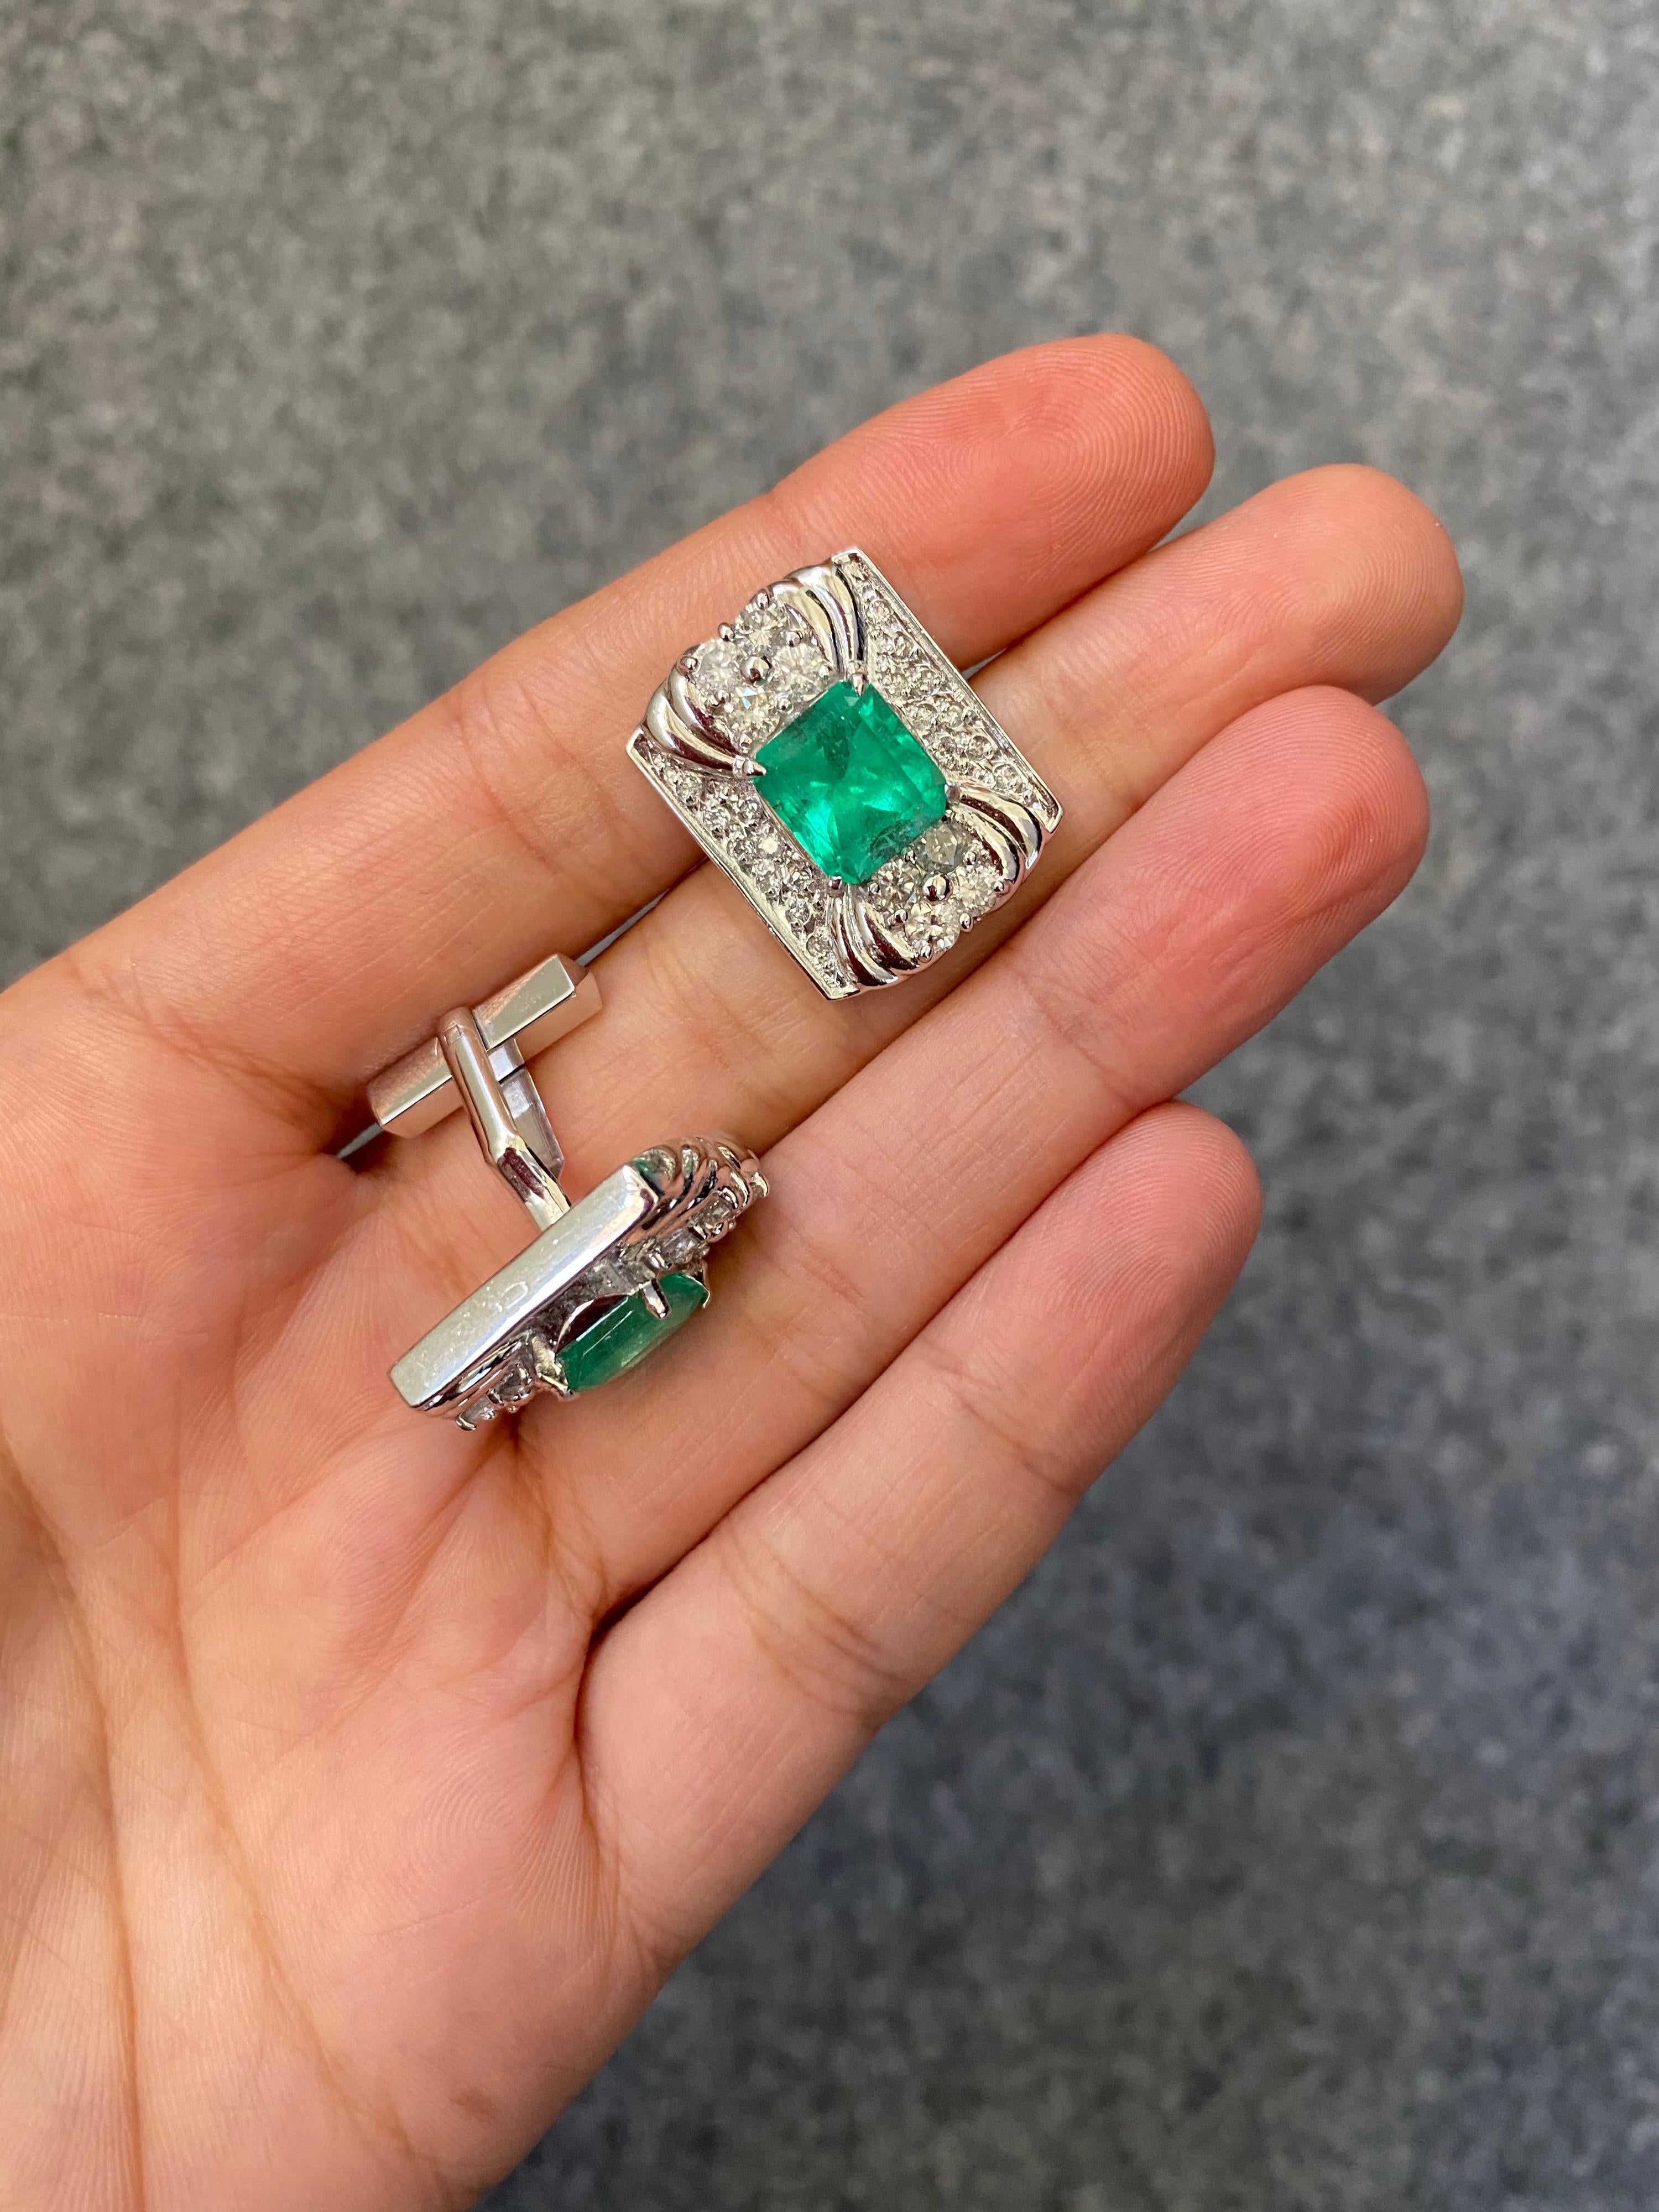 An art-deco inspired set of beautiful Colombian Emerald and Diamond cufflinks and tie-tack, set in Platinum. The cufflinks consist of 4.93 carats transparent, full of luster Colombian Emeralds and 2.08 carats of colorless, VS Diamonds. The tie-pin